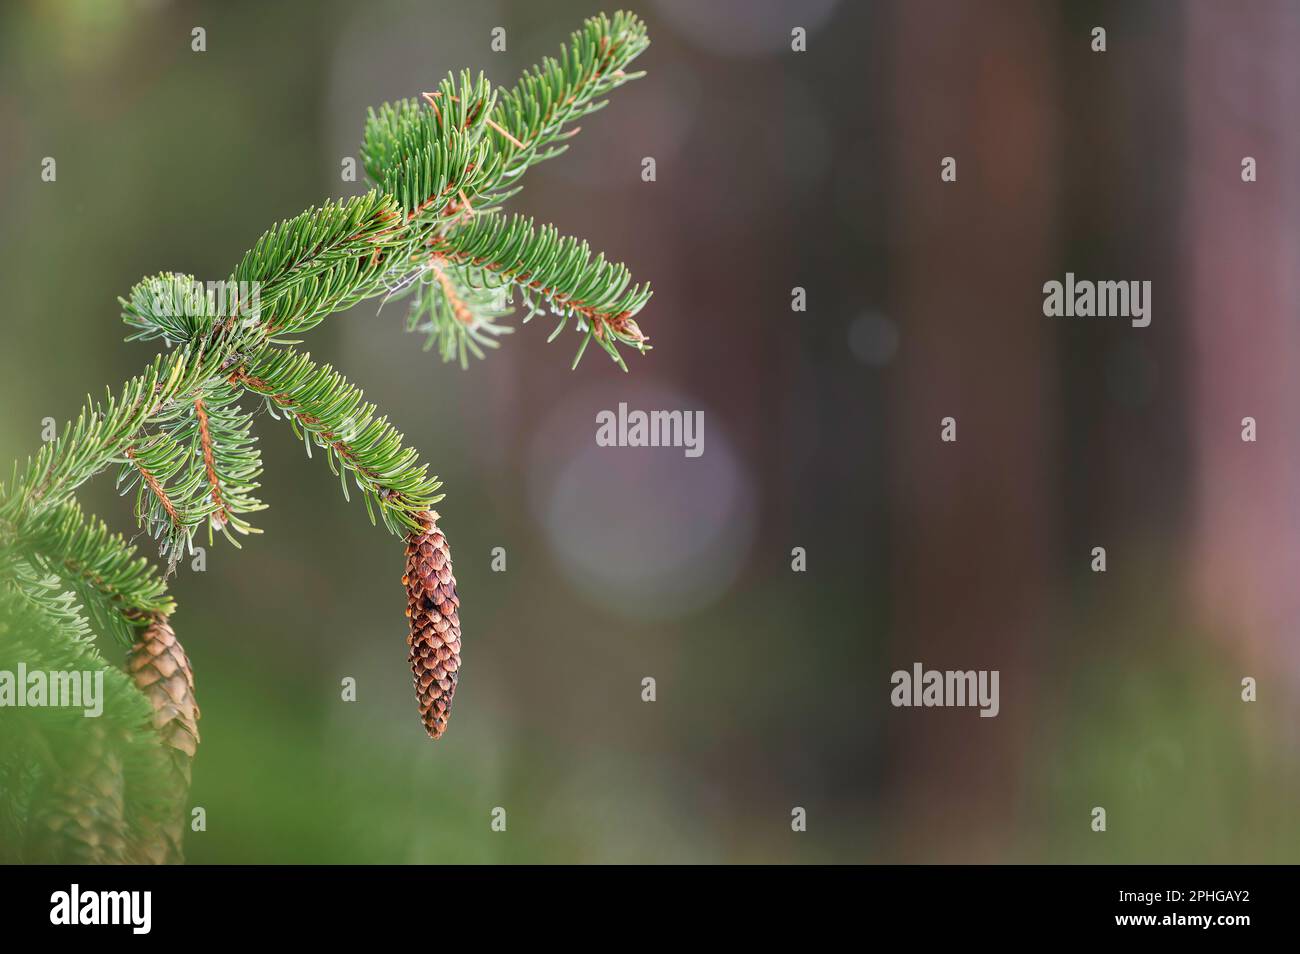 European spruce aka Norway spruce, Picea abies, cones hanging from branch. Stock Photo